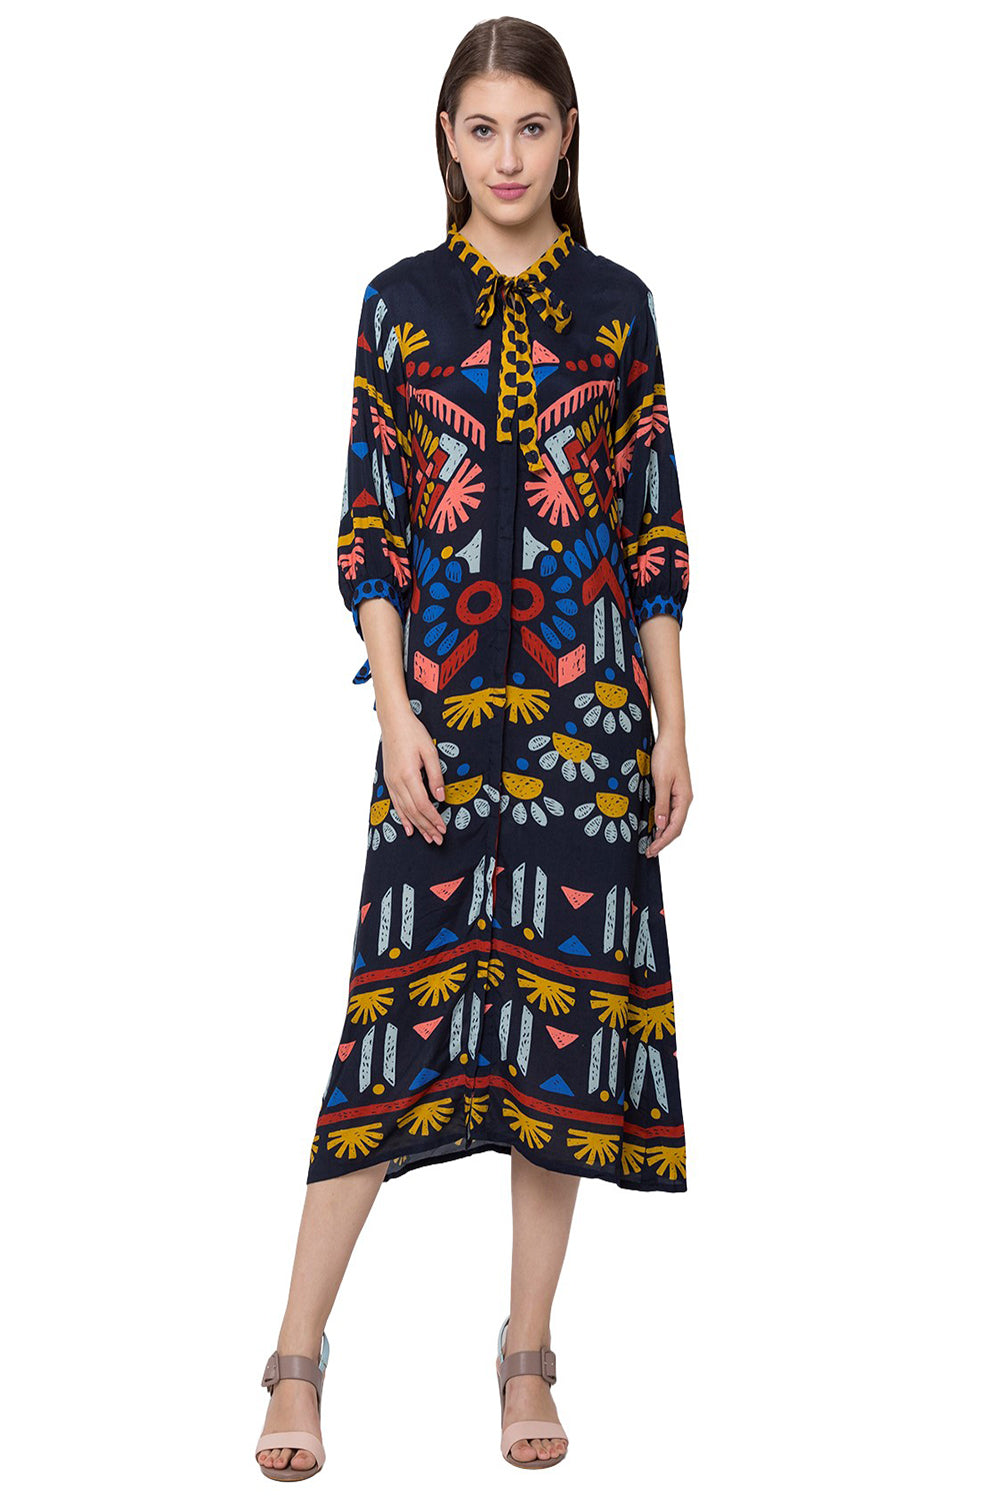 Abstract Floral Printed Dress With Neck And Sleeves Tie Up